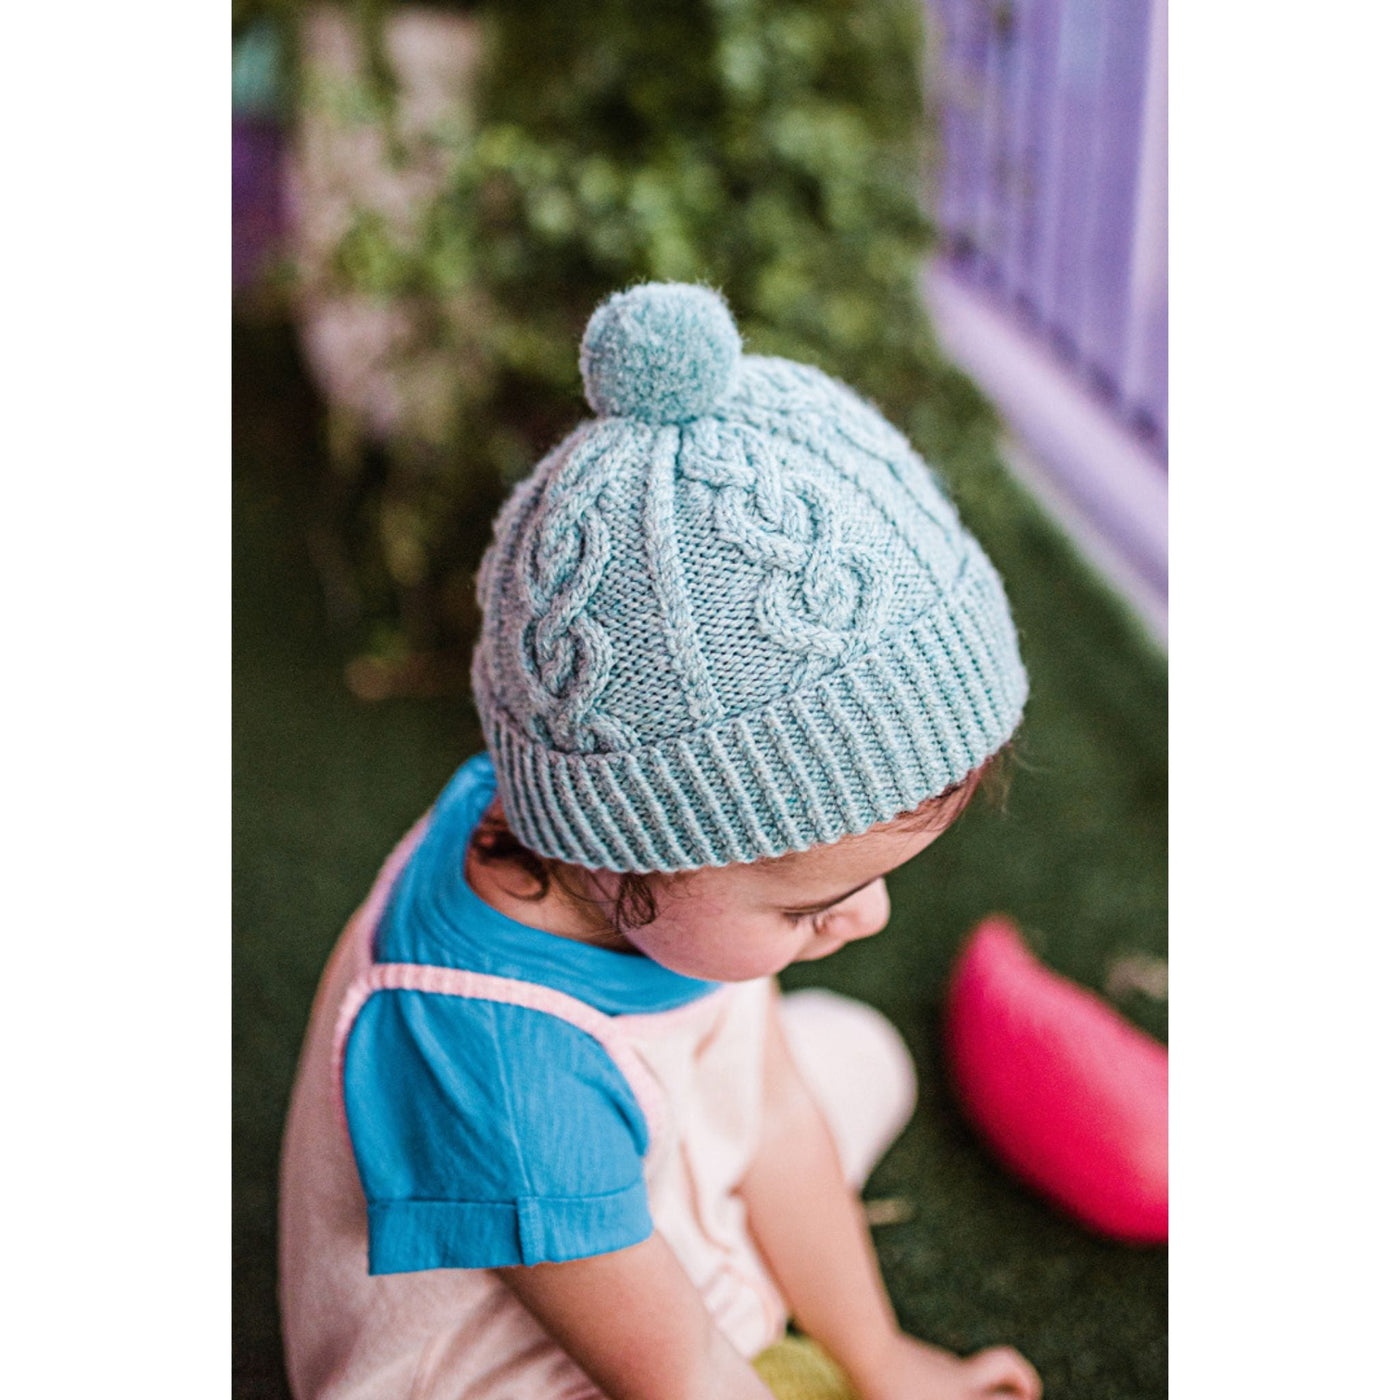 Pattern in minipom magazine shows aerial view of child wearing handknit hat with heart designs.